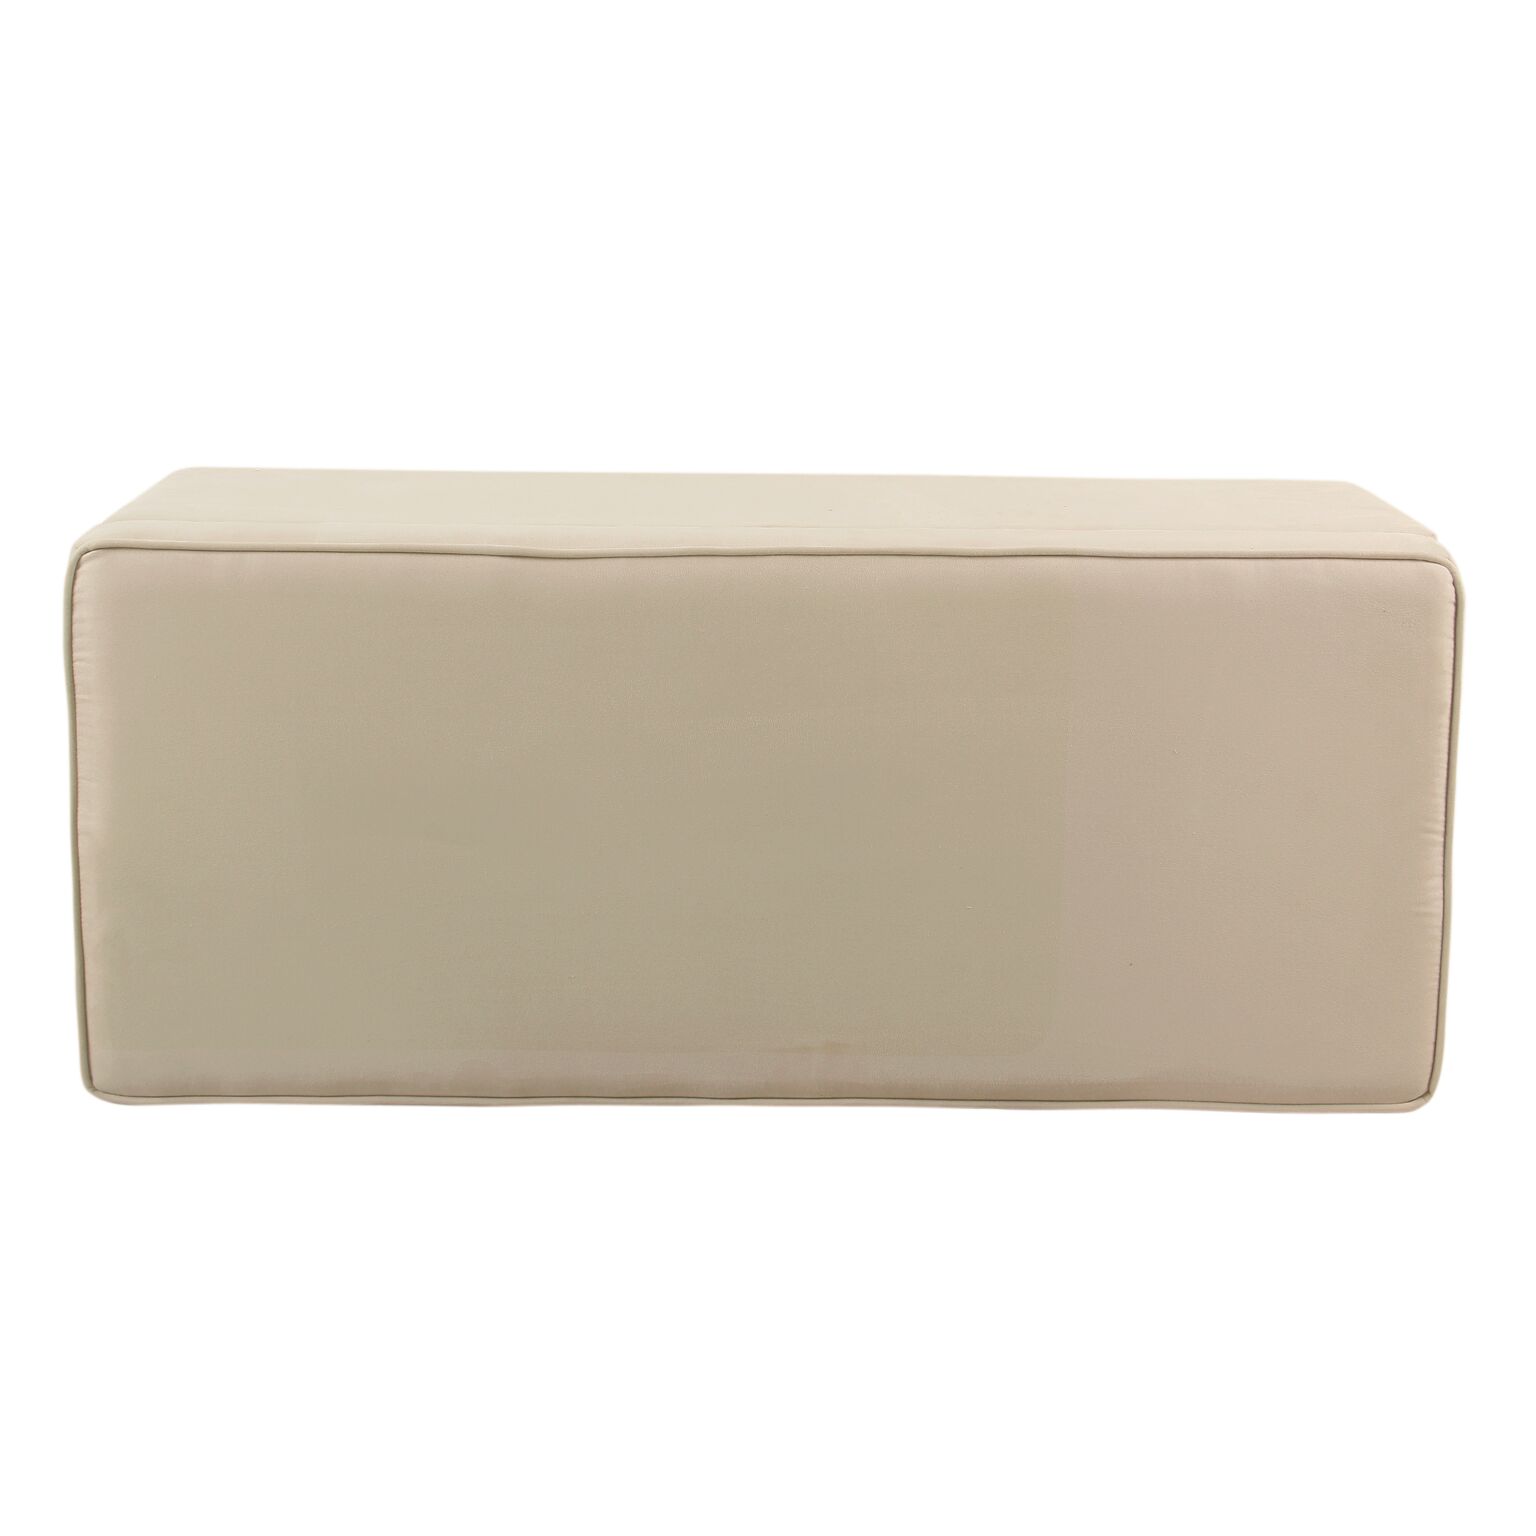 HomePop End of Bed Storage Bench, Cream - image 2 of 6